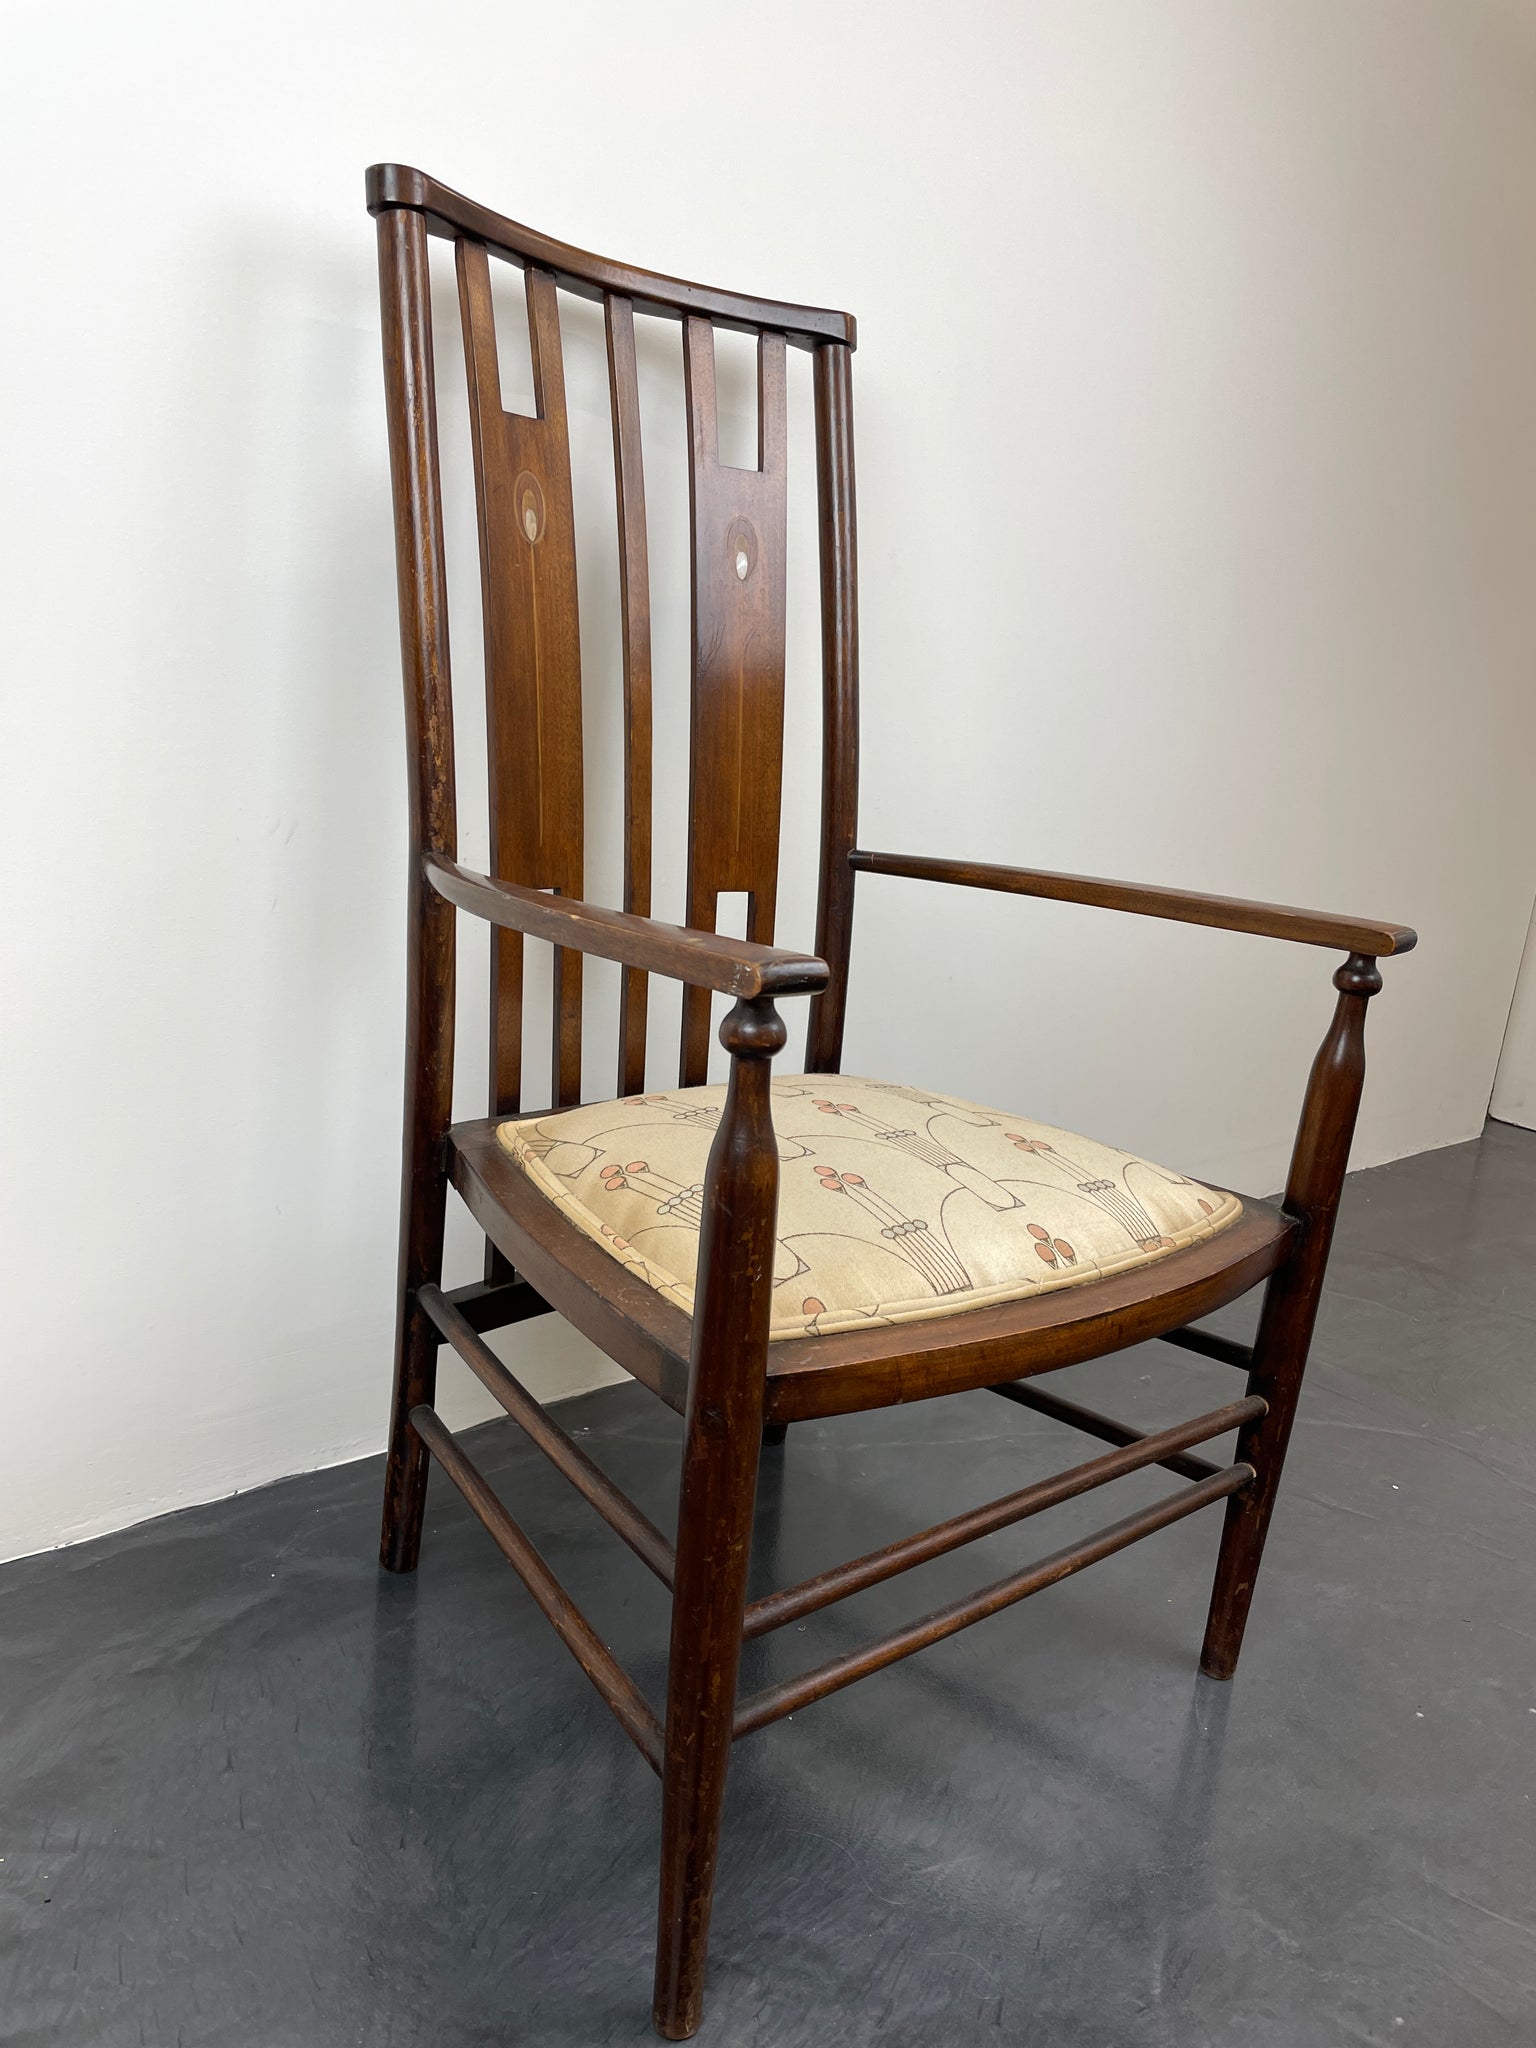 Charles Rennie Mackintosh [STYLE OF] Low Armchair, early 20th c.